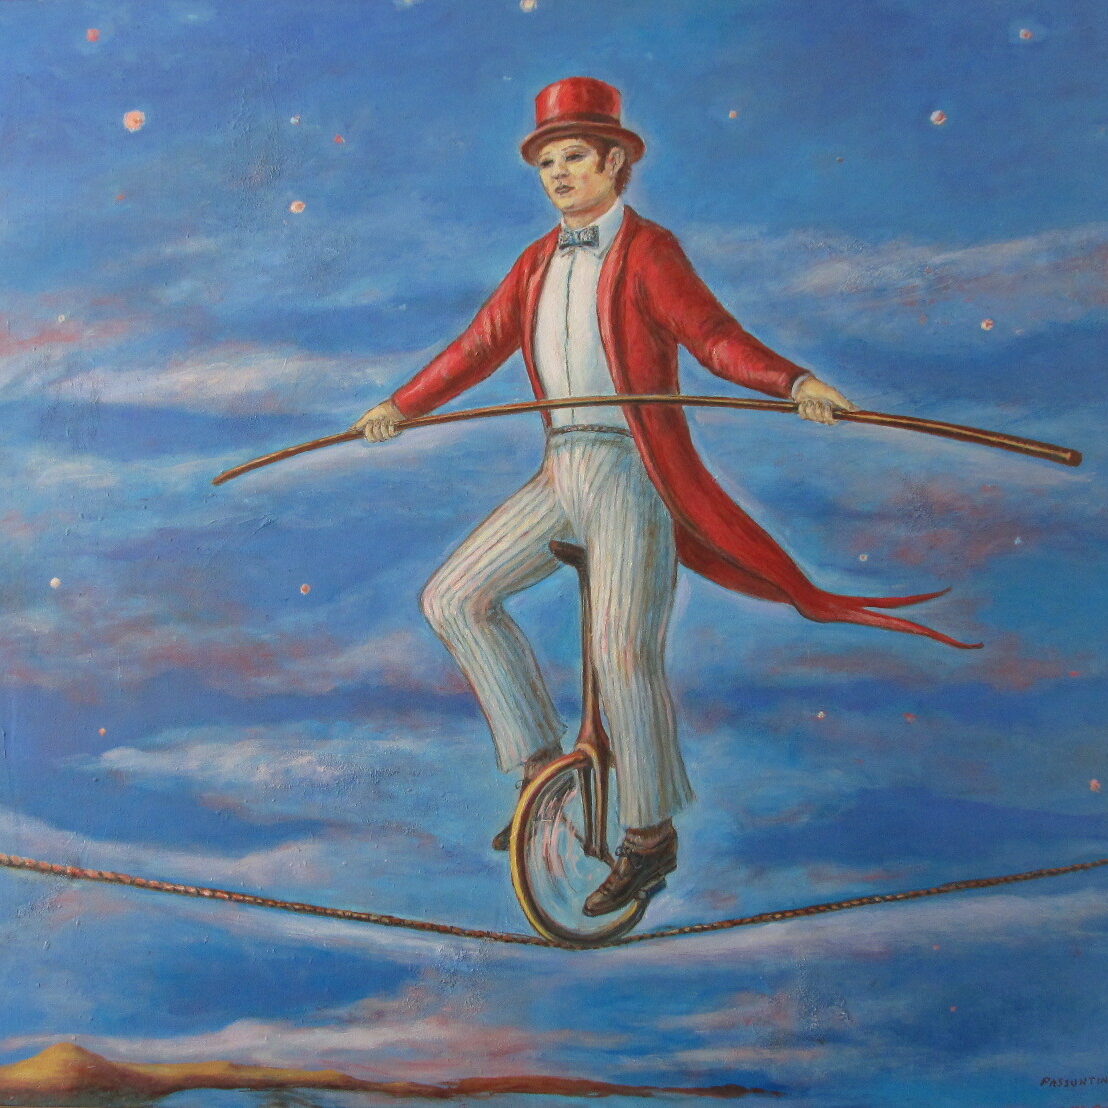 Peter Passuntino, "Night TIme Unicyclist," 1983- 1984, oil on canvas, 60”H x 64”W